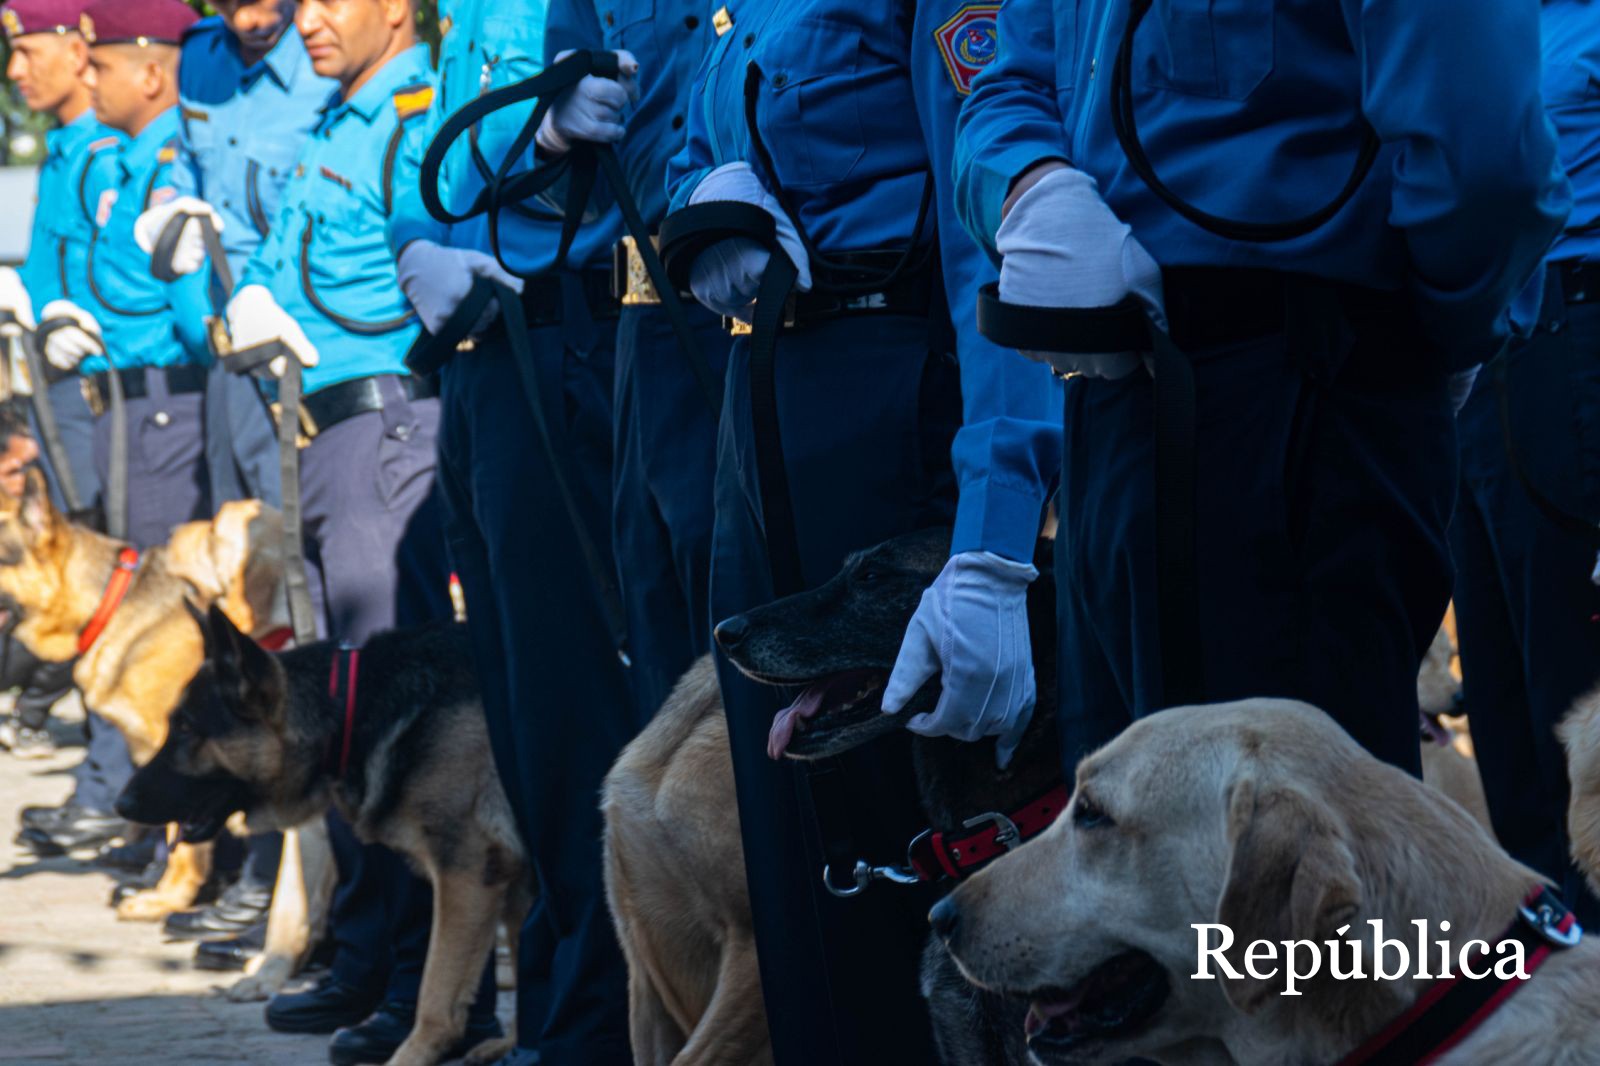 Nepal Police procuring 12 canines for Rs 2.9 million for investigative purposes